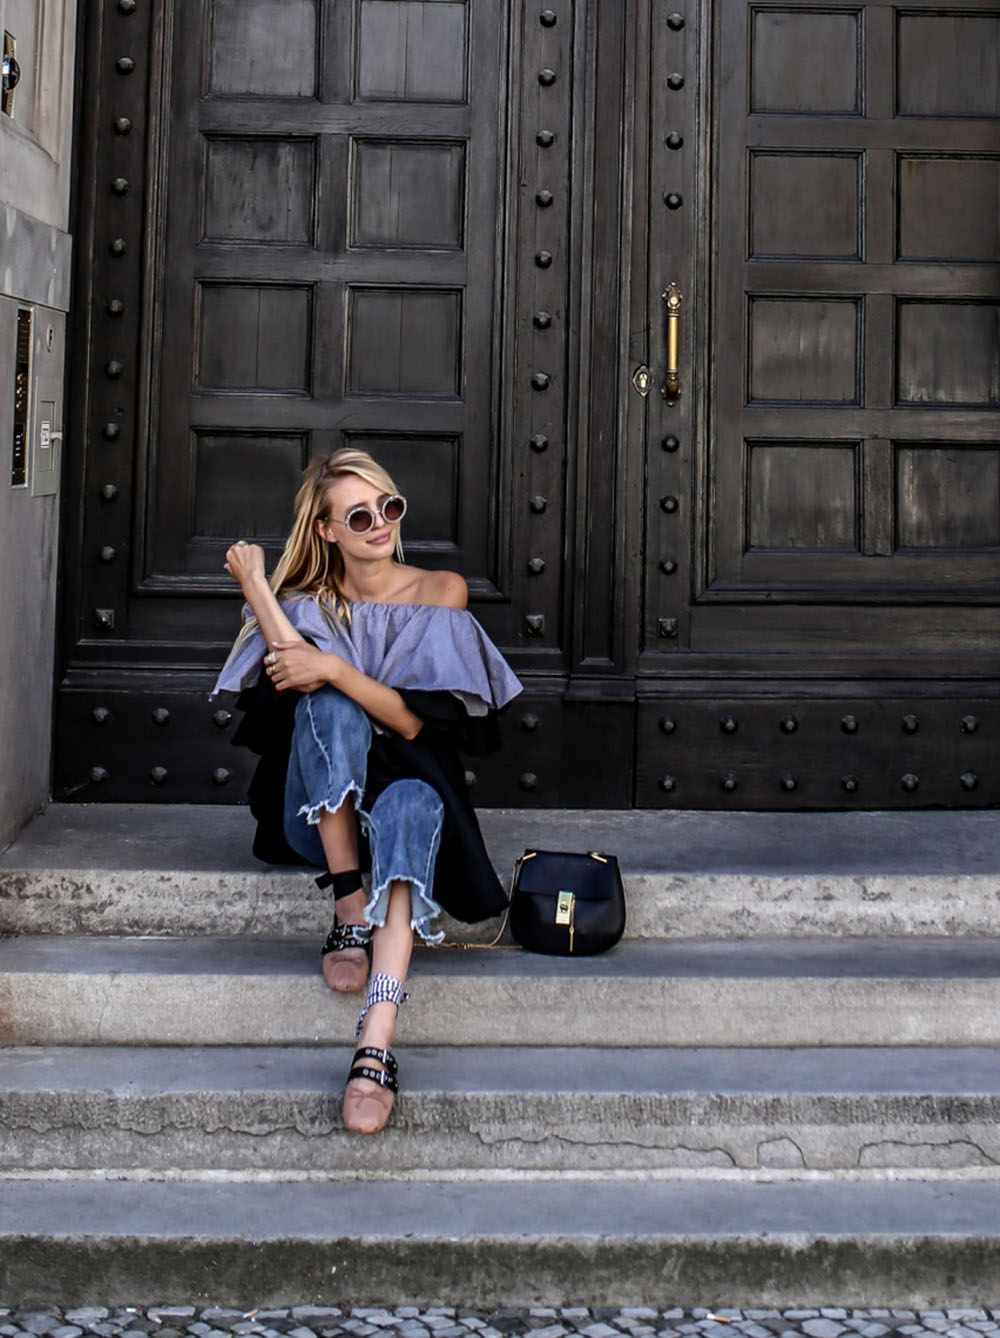 Offset the ballerina pink with rough denim and edgy layering like @OhhCouture.